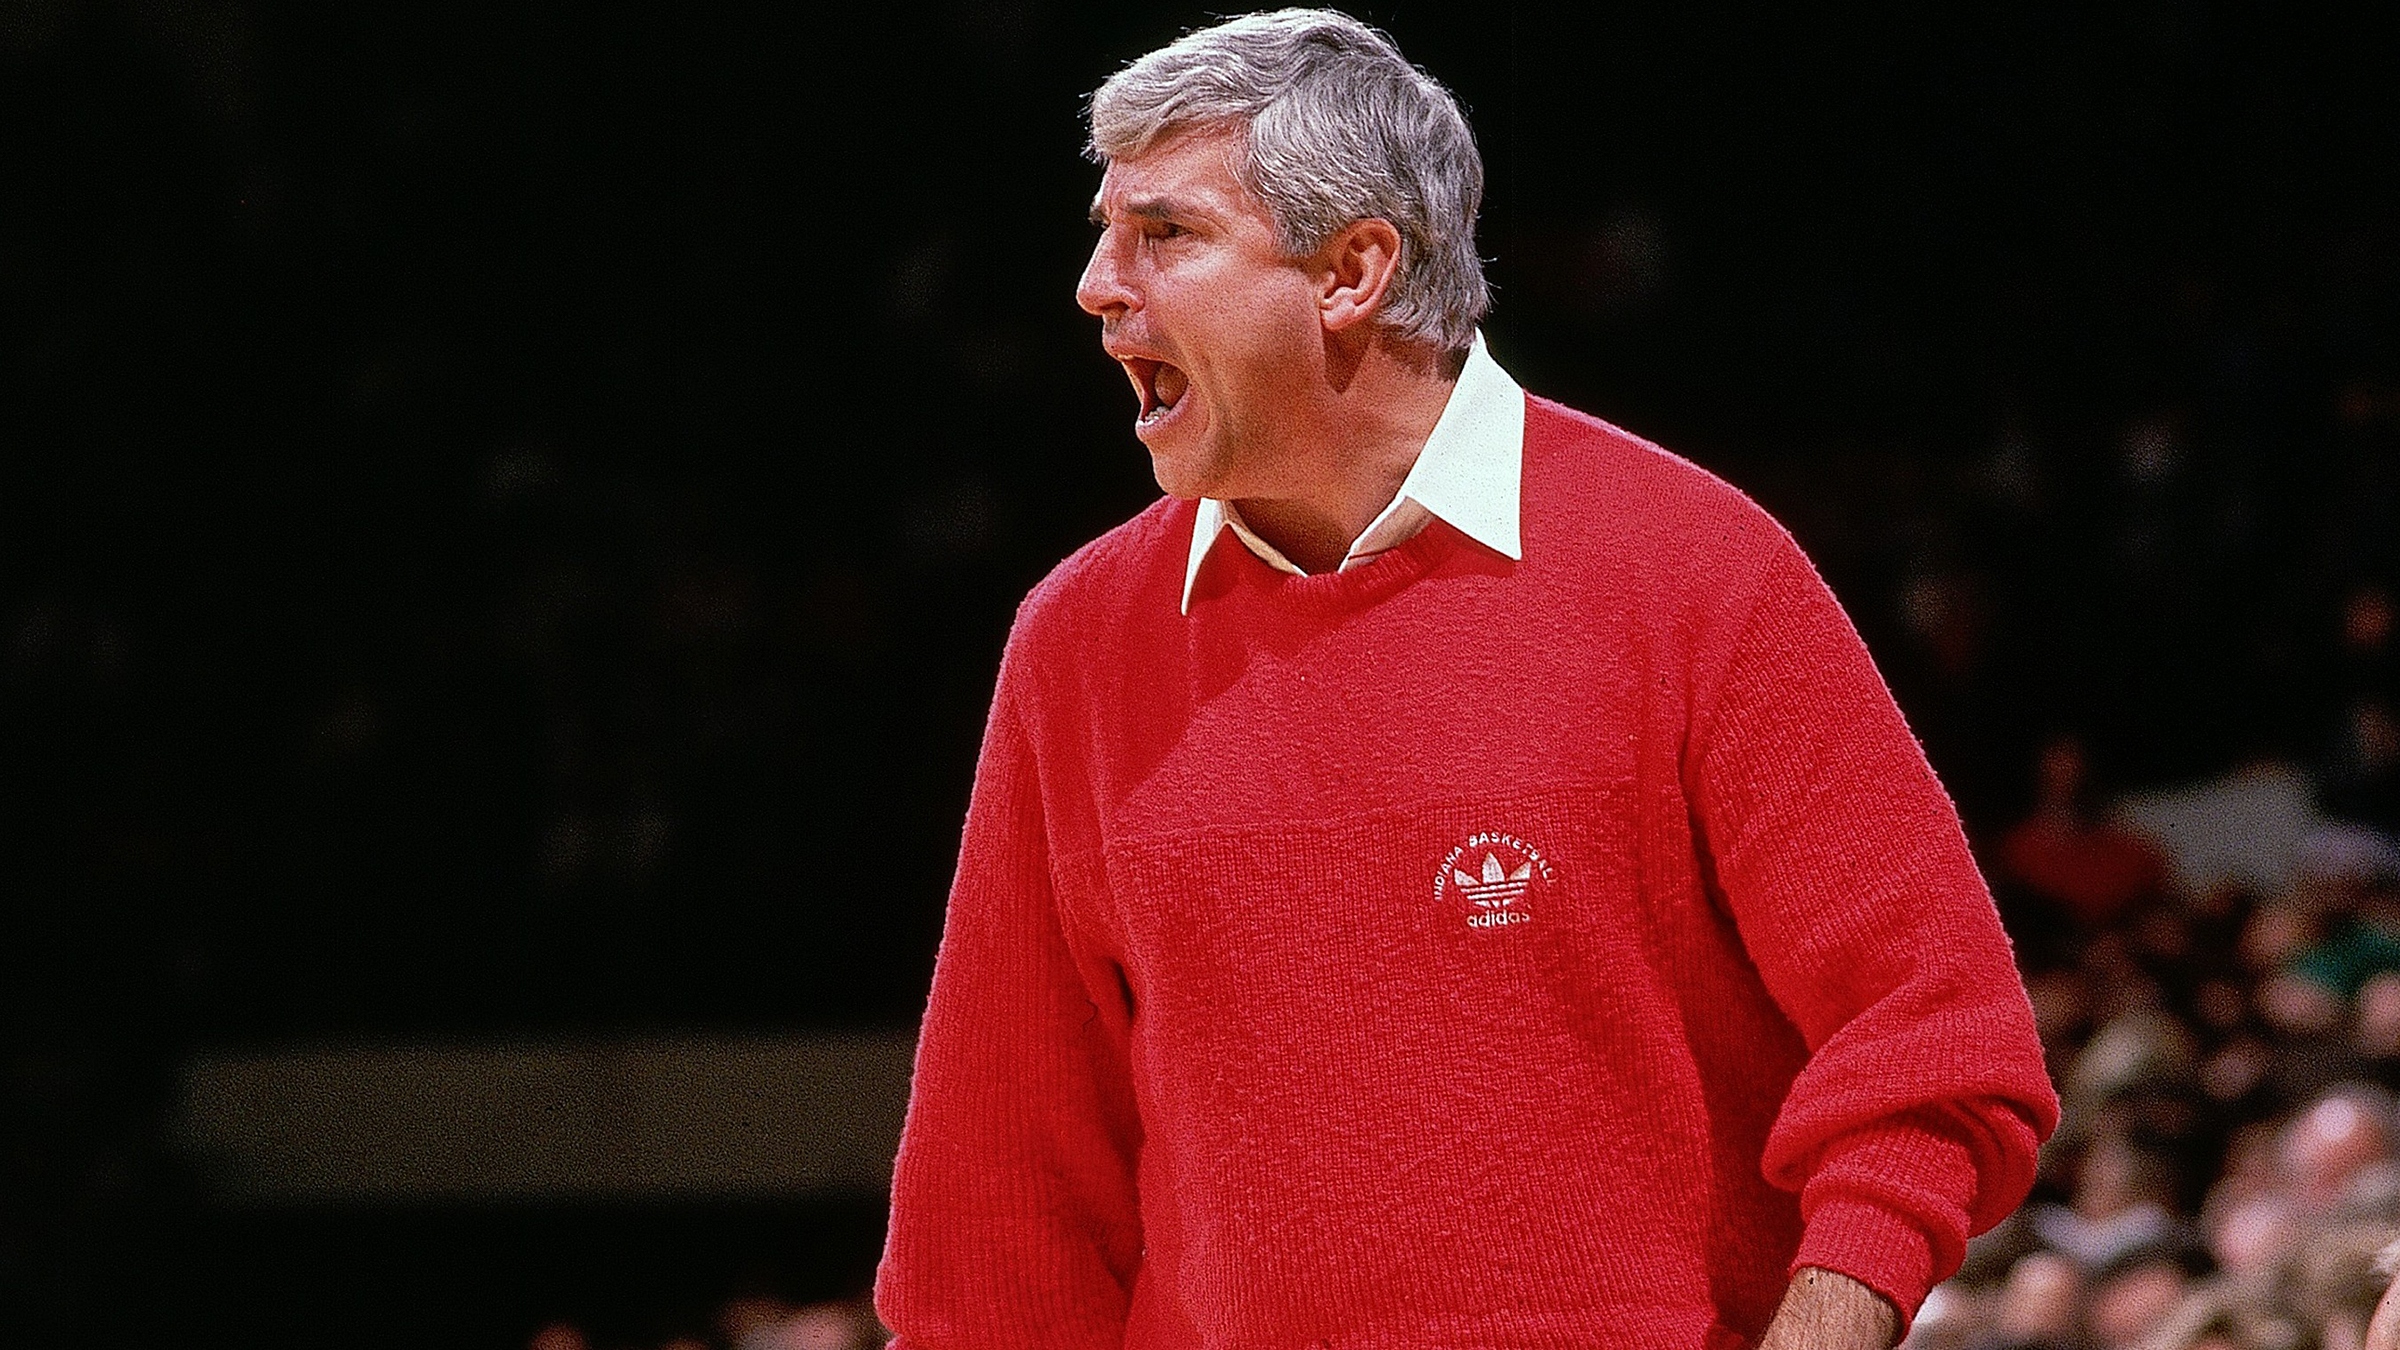 In 29 years at Indiana, Knight led the Hoosiers to five Final Fours and three national championships.